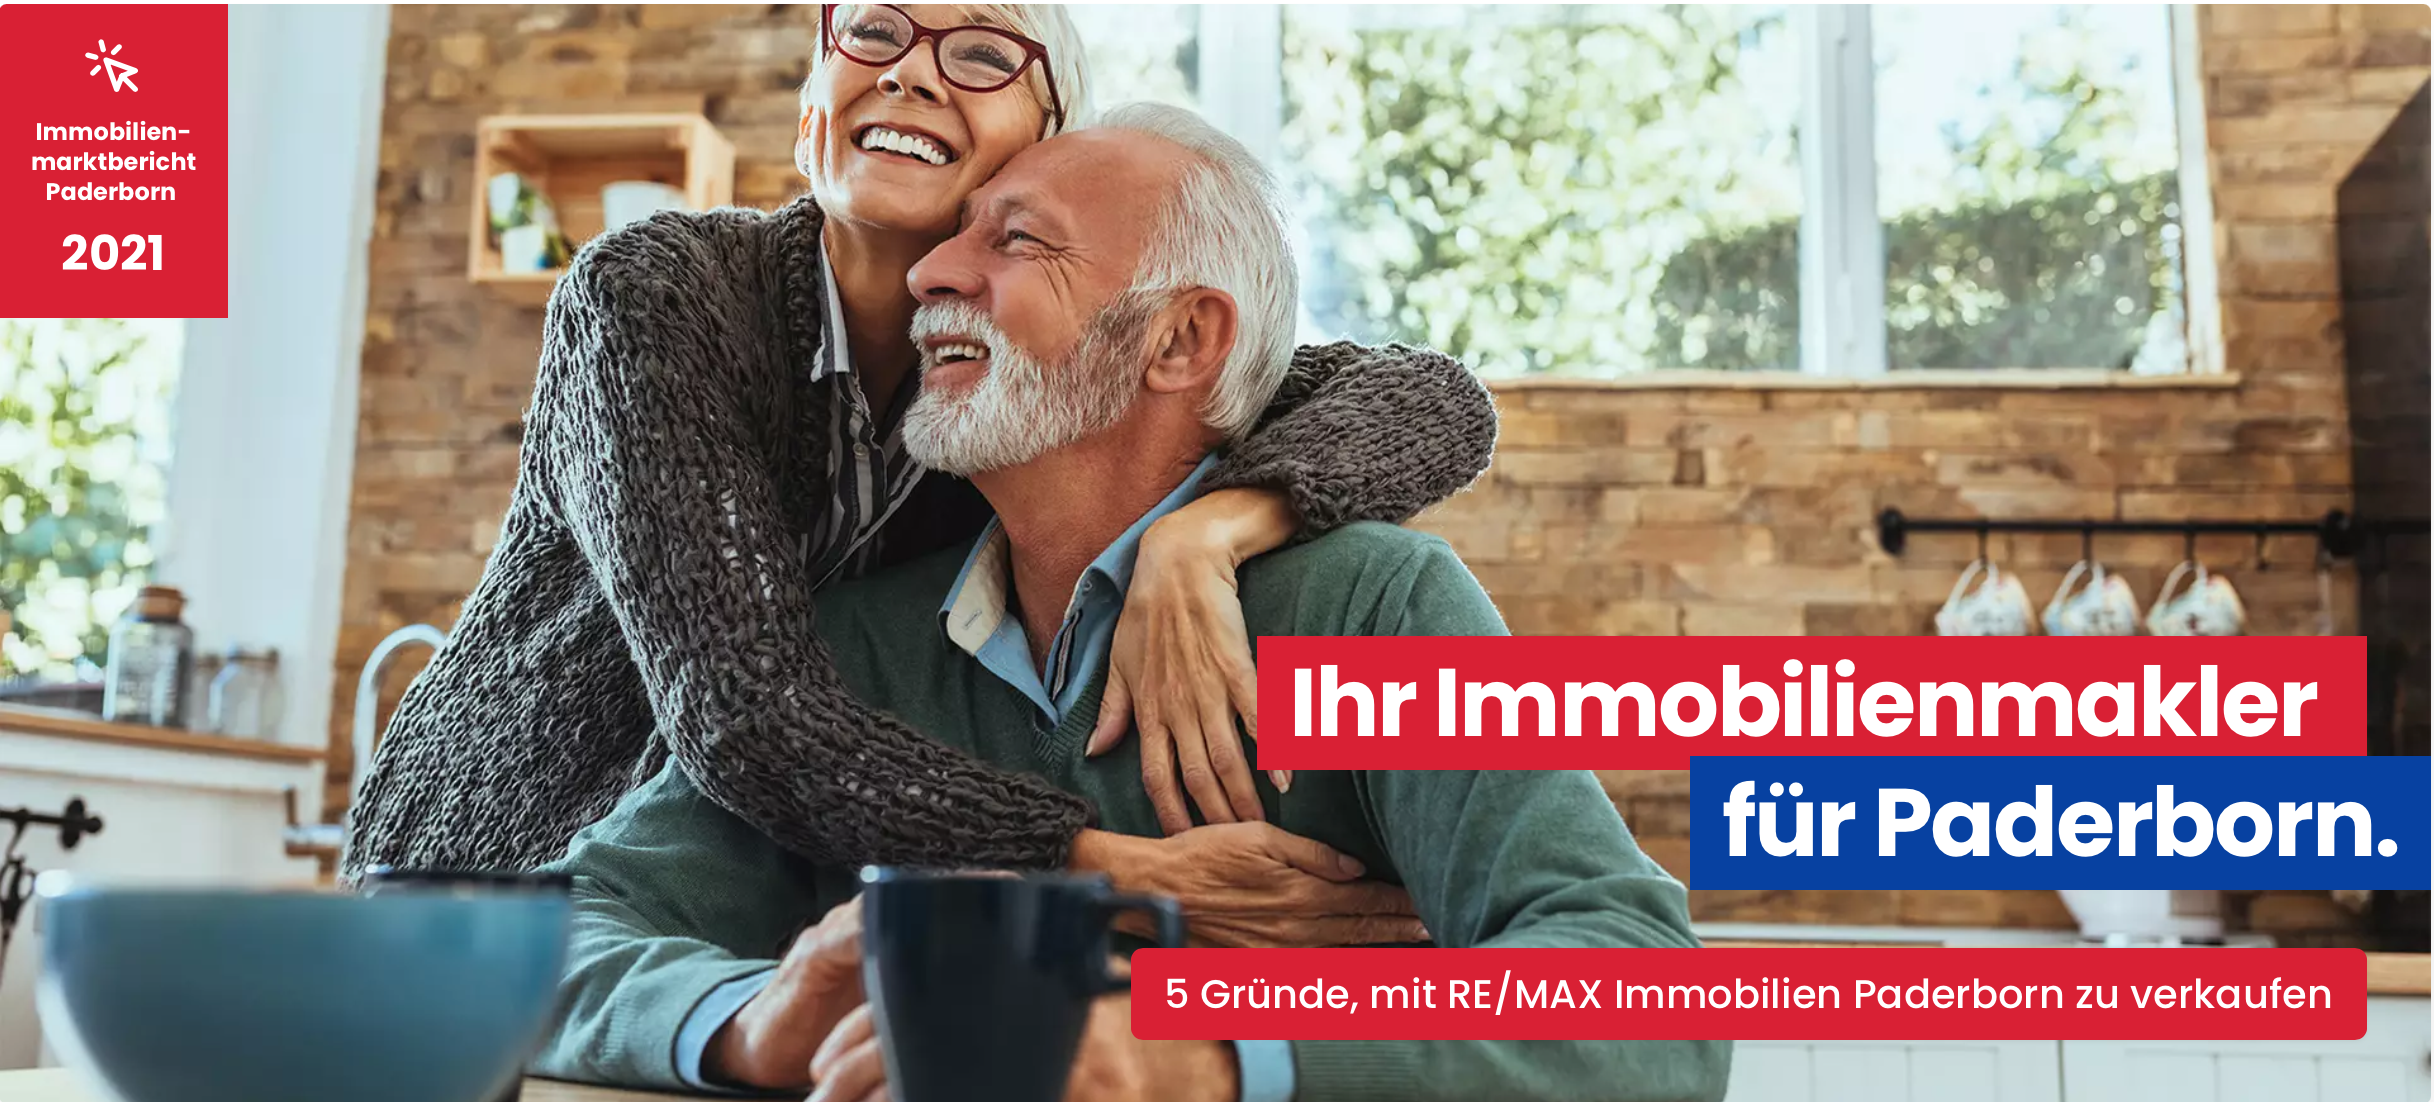 remax immobilien paderborn